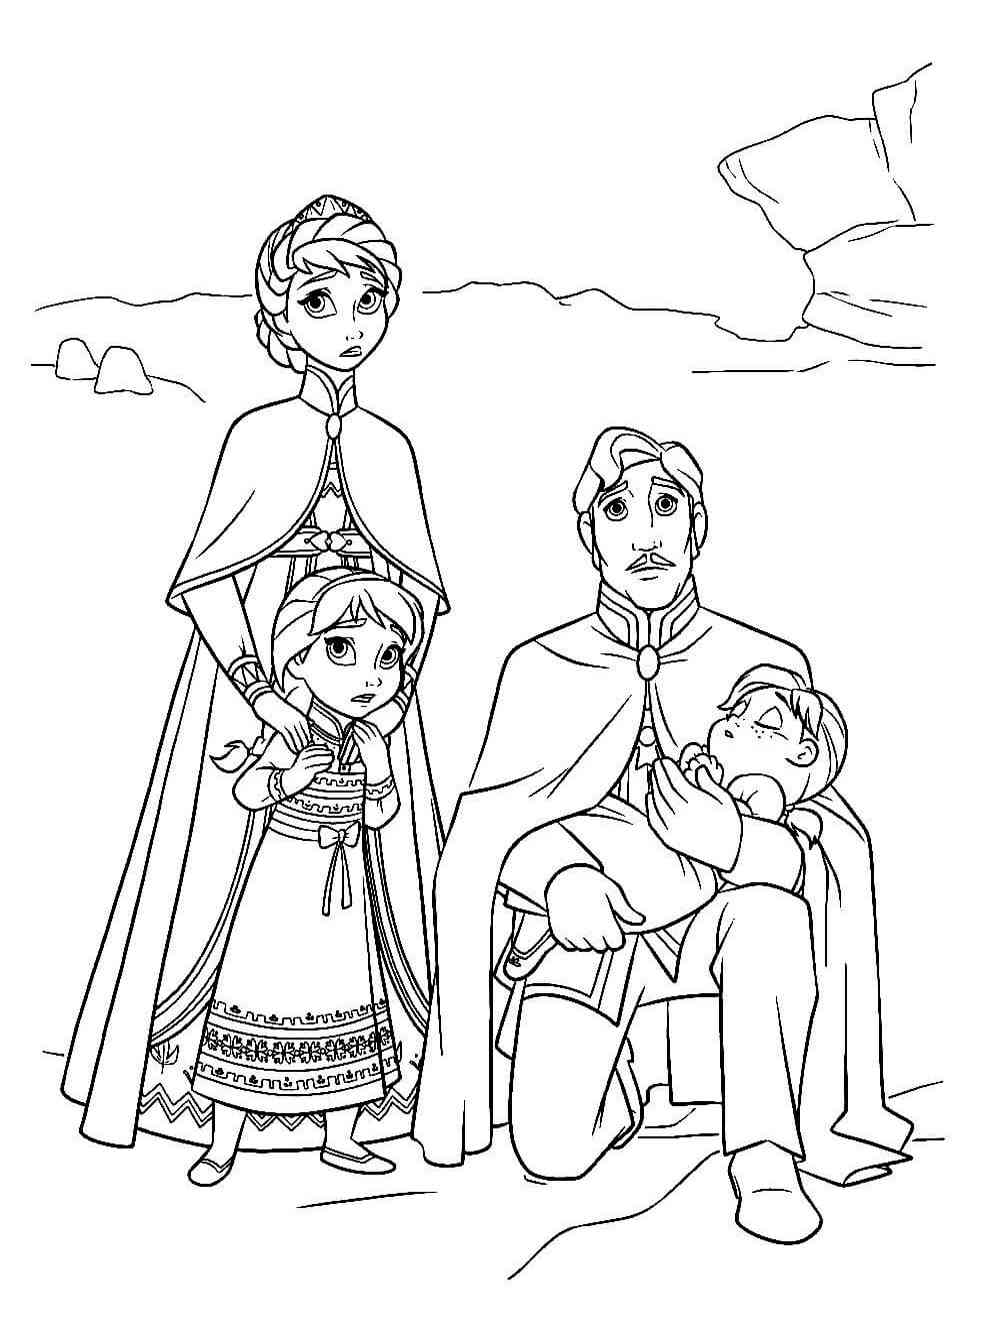 Frozen 2 coloring page